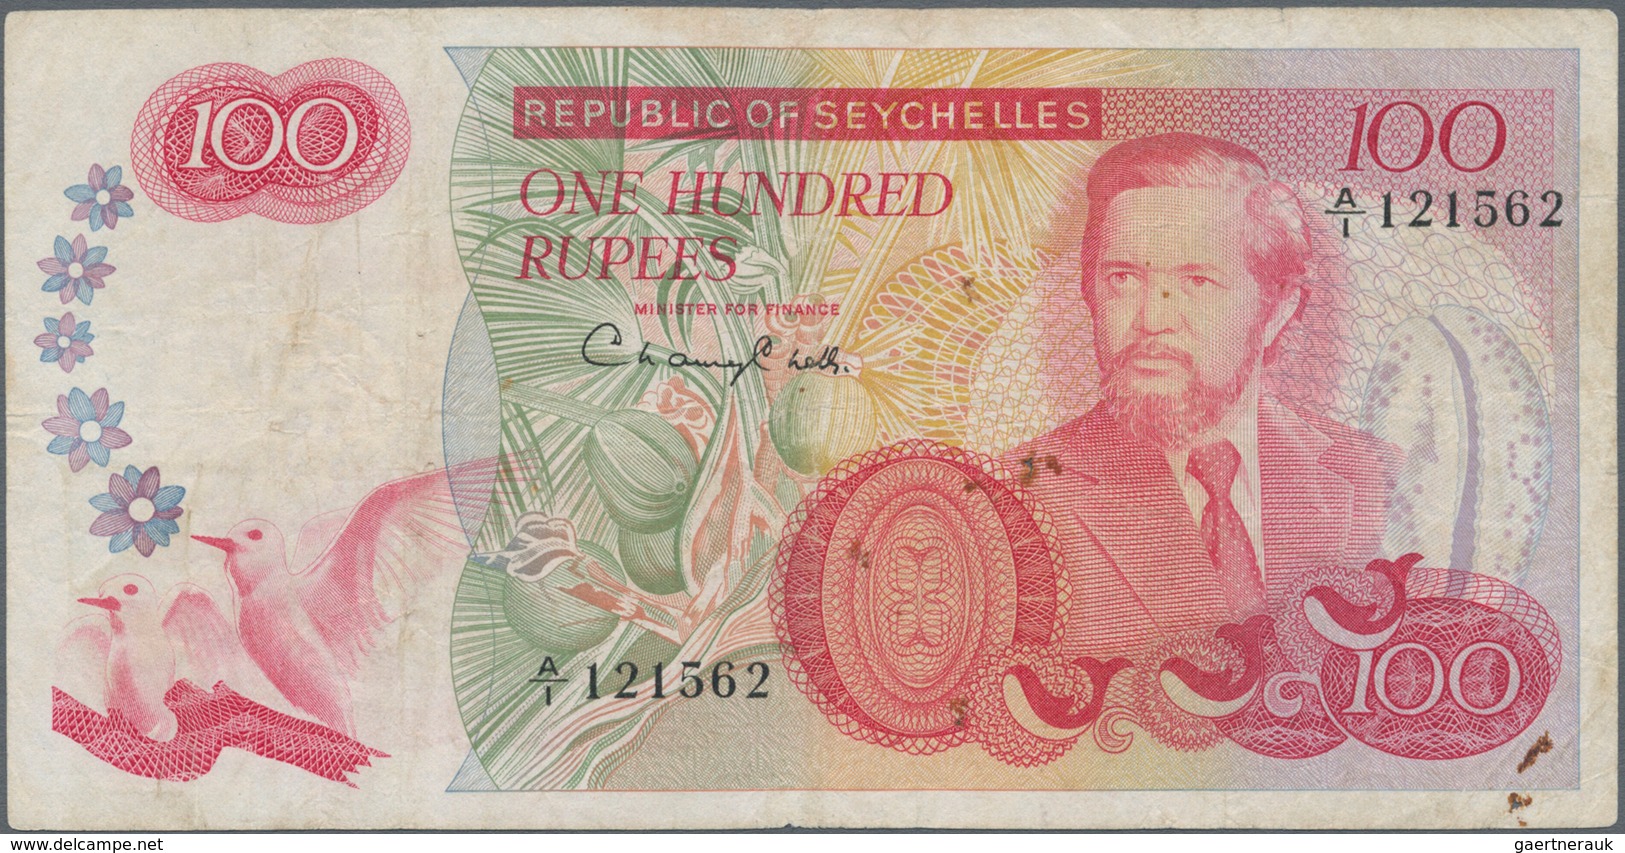 Seychelles / Seychellen: Republic Of Seychelles Set With 3 Banknotes Of The ND(1976-77) Series With - Seychellen